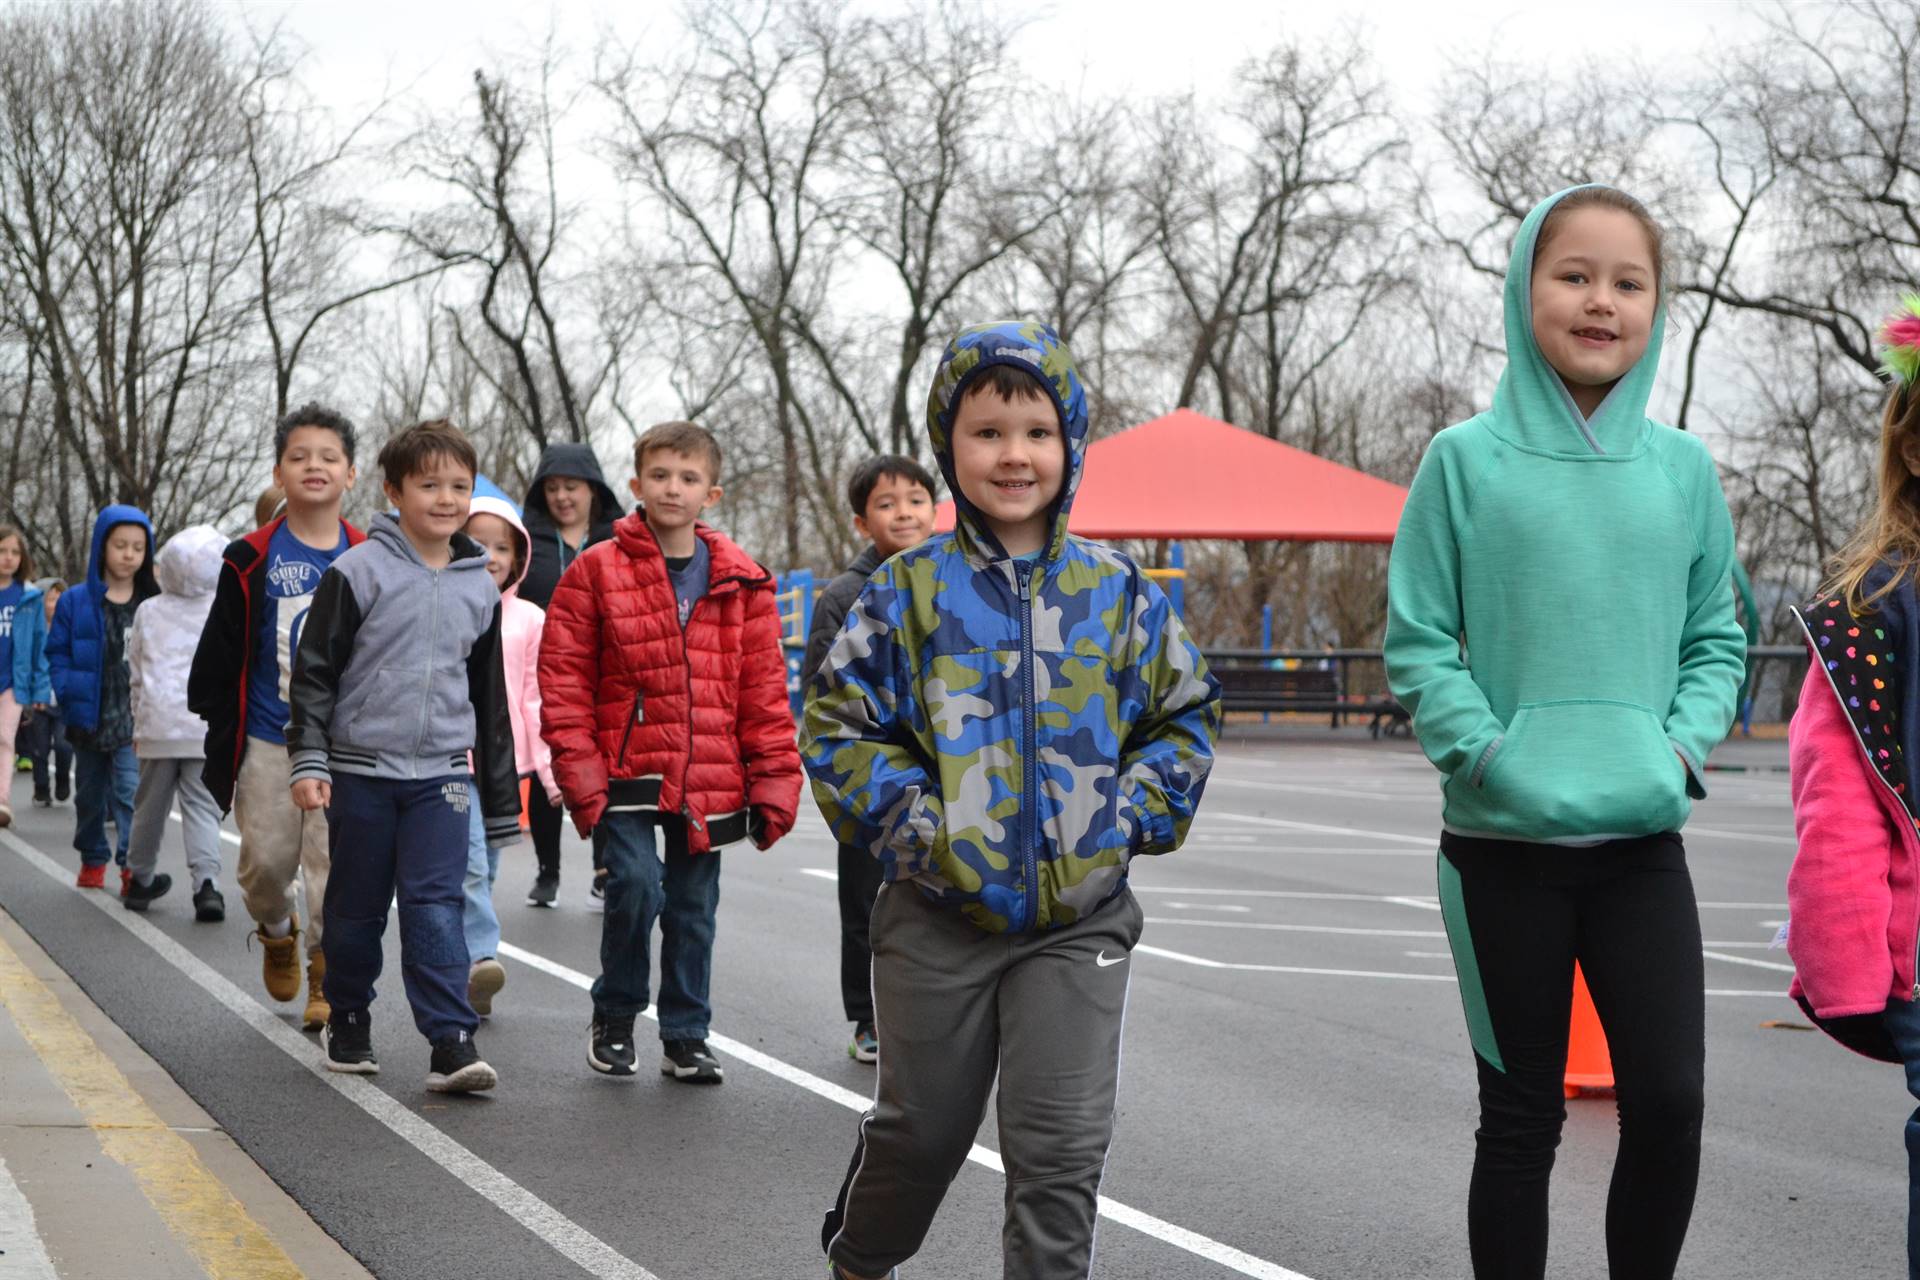 Marzolf students walk laps for the Walk for Kindness